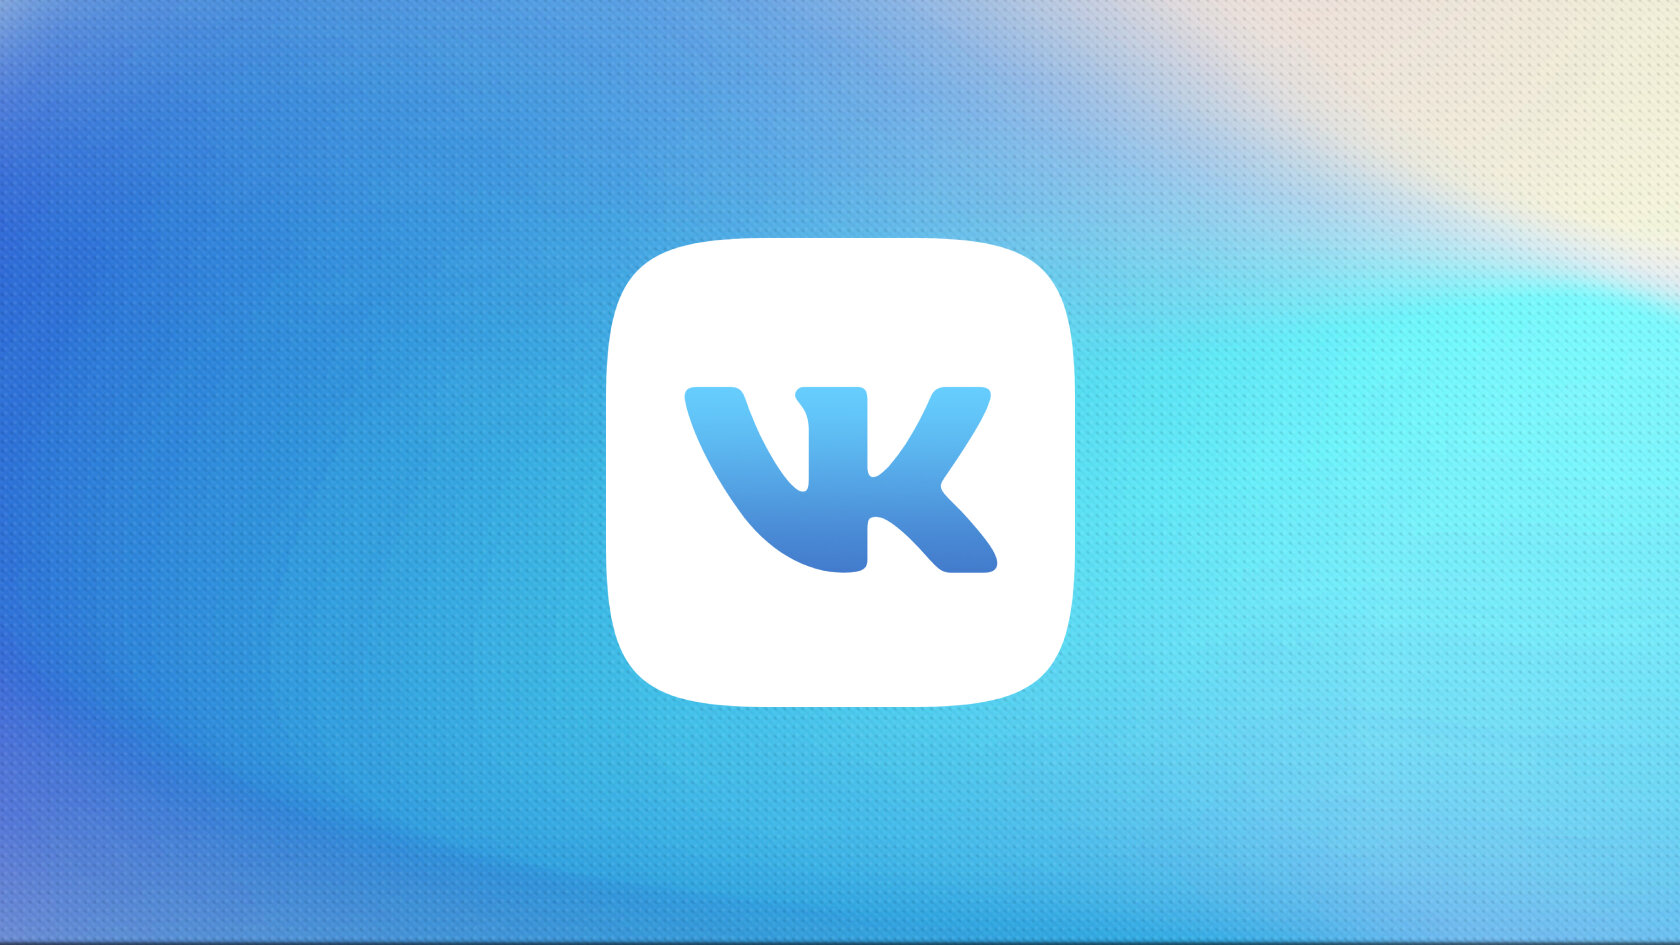 vk new interface redesign 2019 10